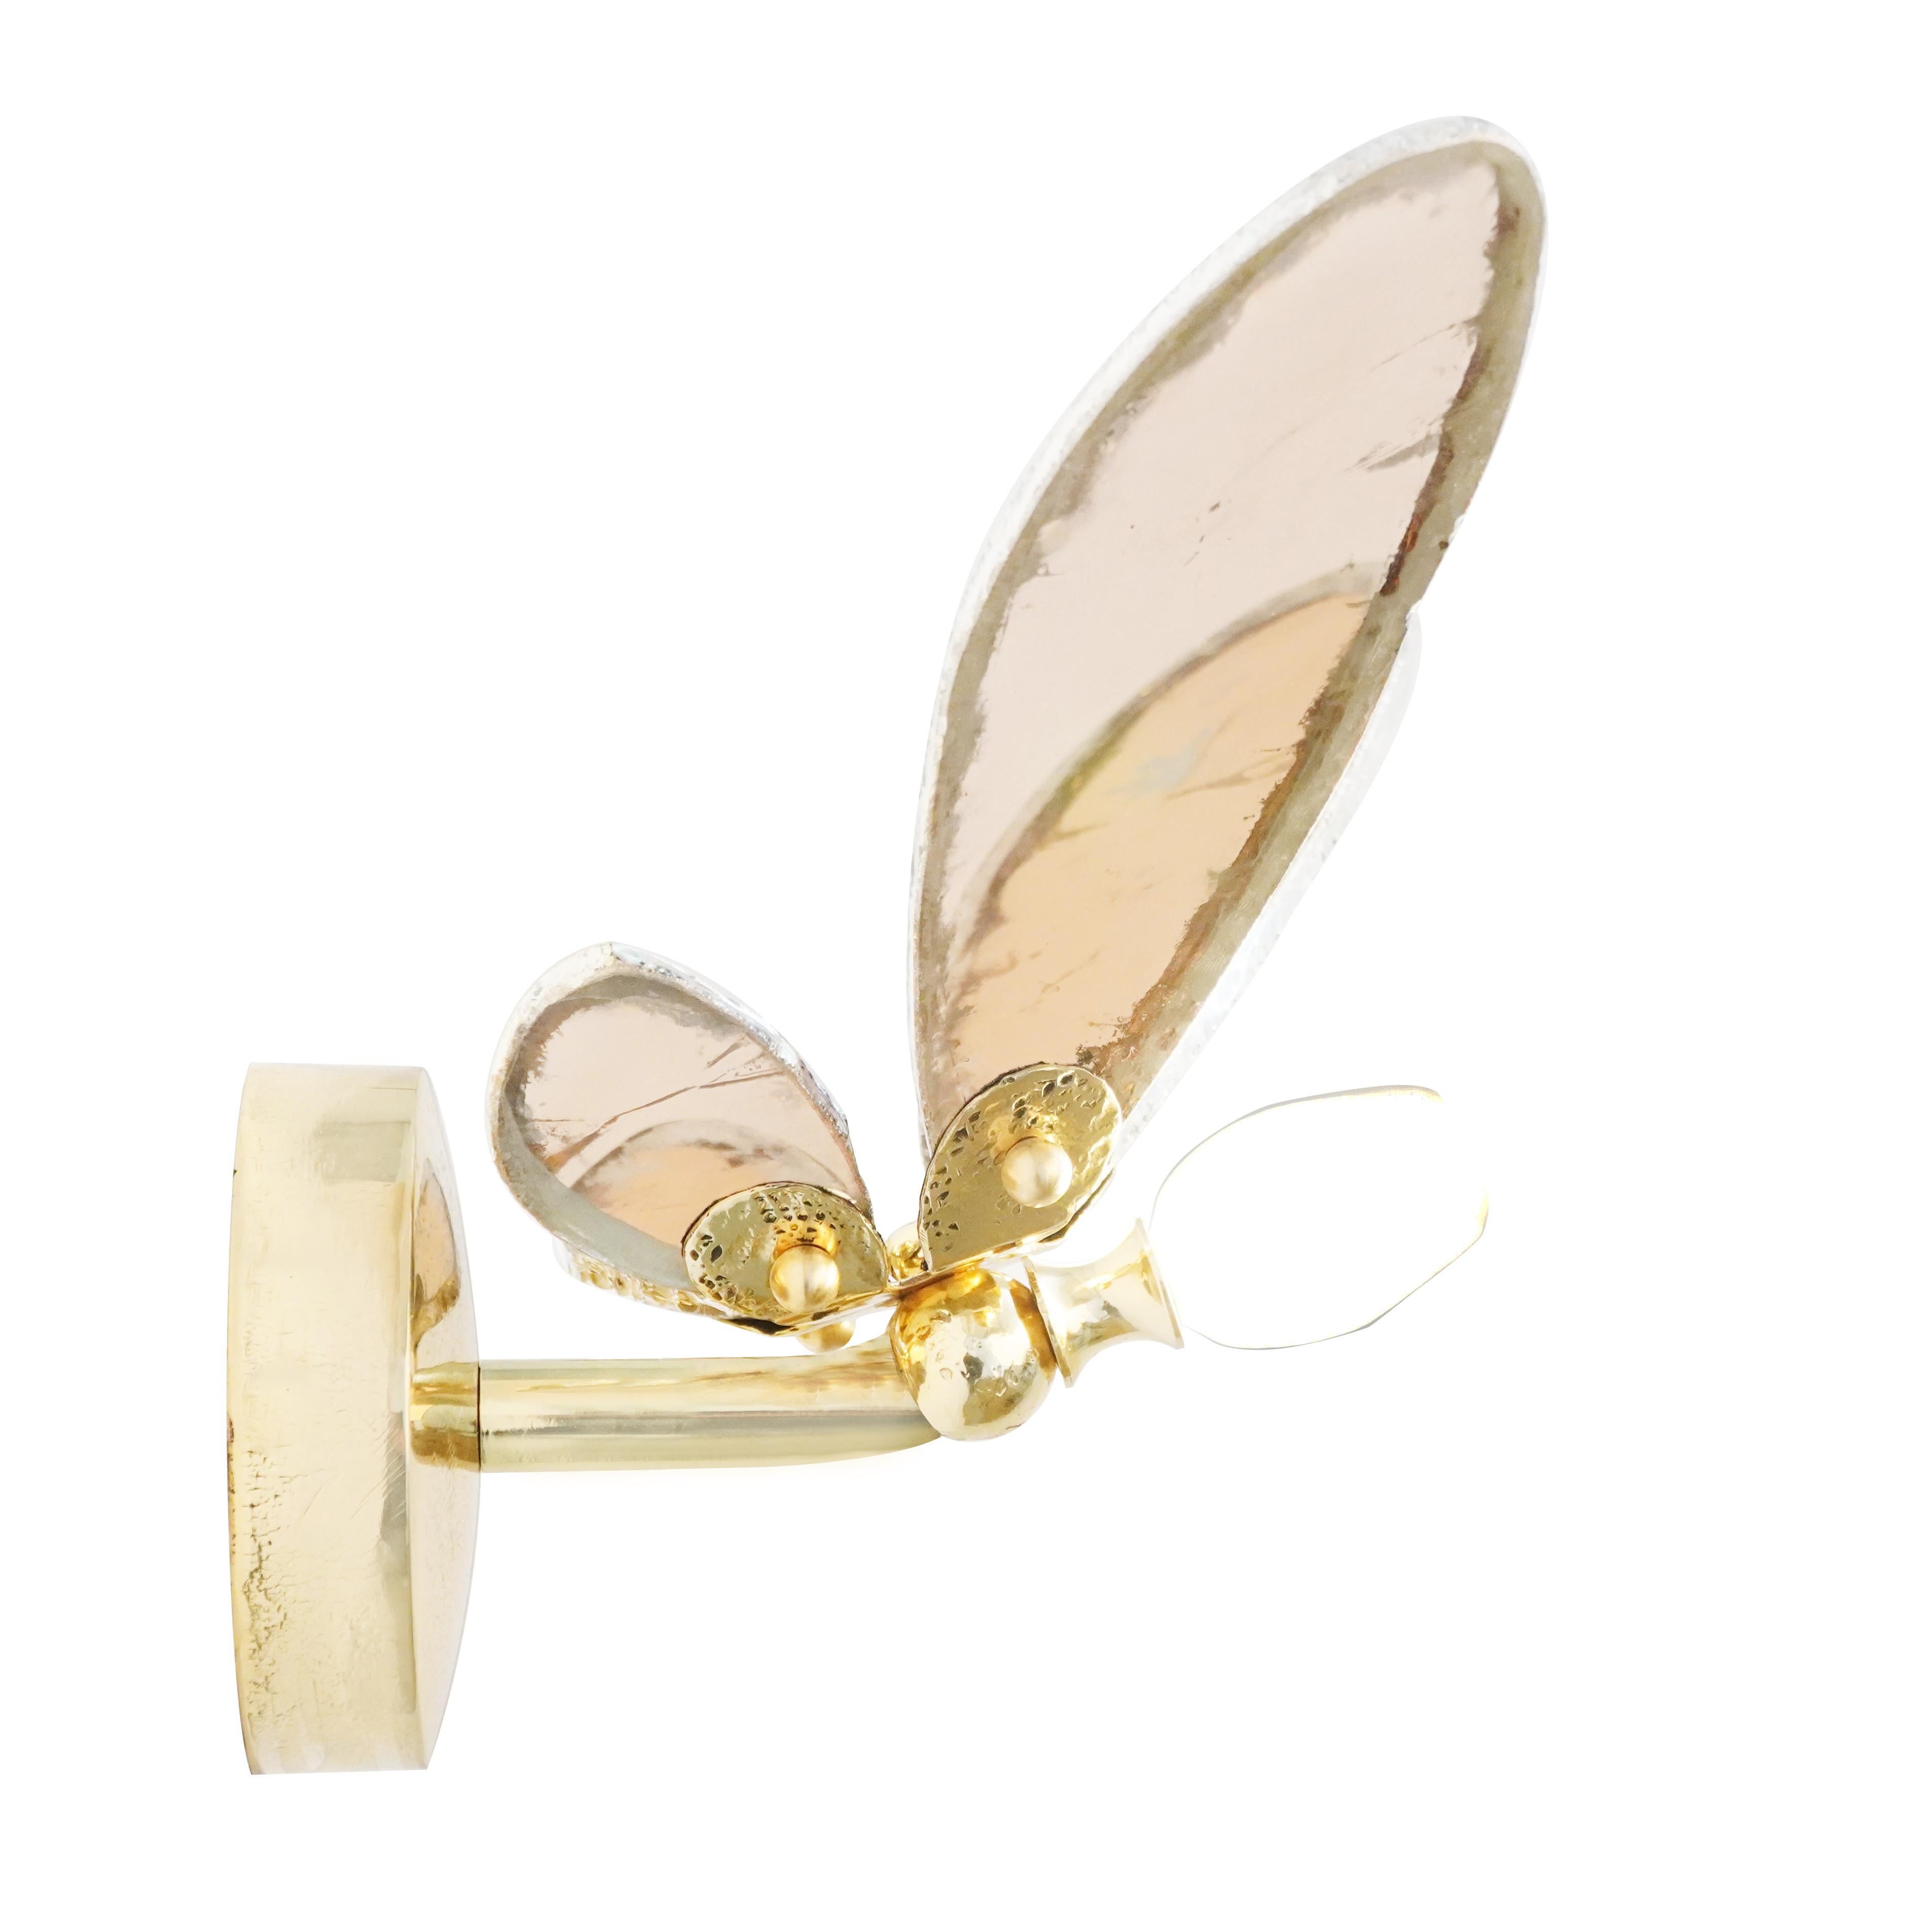 TRILLY the fairy wings of freedom

The House of the artisanal objects is create by combining form and function through unparalleled craftsmanship, Sabrina Landini has remained a steadfast proponent of living with luxury every day.

An ethereal